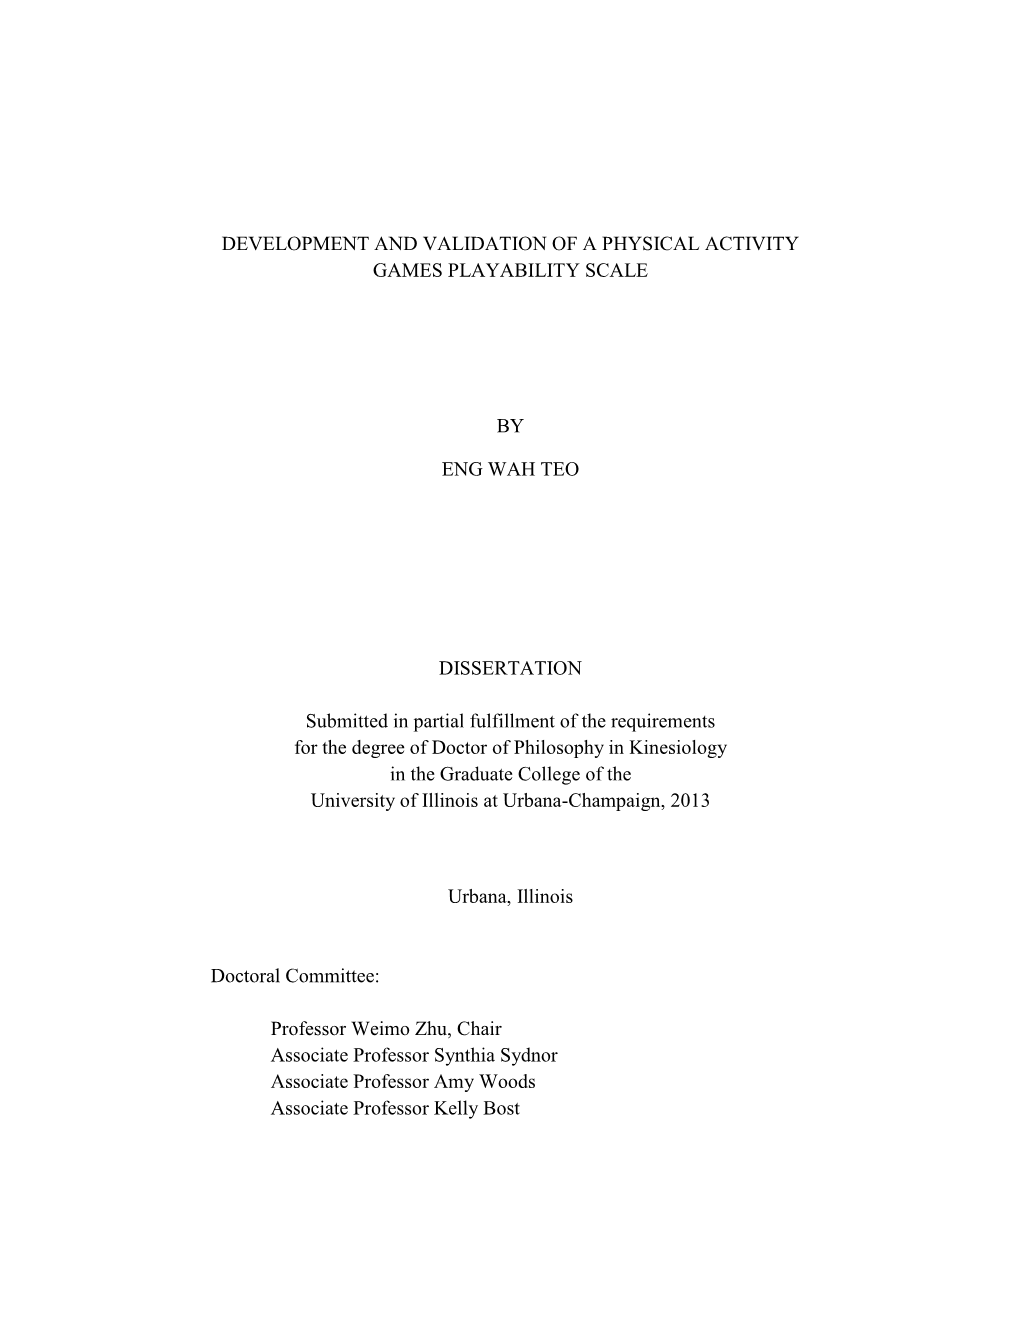 DEVELOPMENT and VALIDATION of a PHYSICAL ACTIVITY GAMES PLAYABILITY SCALE by ENG WAH TEO DISSERTATION Submitted in Partial Fulfi